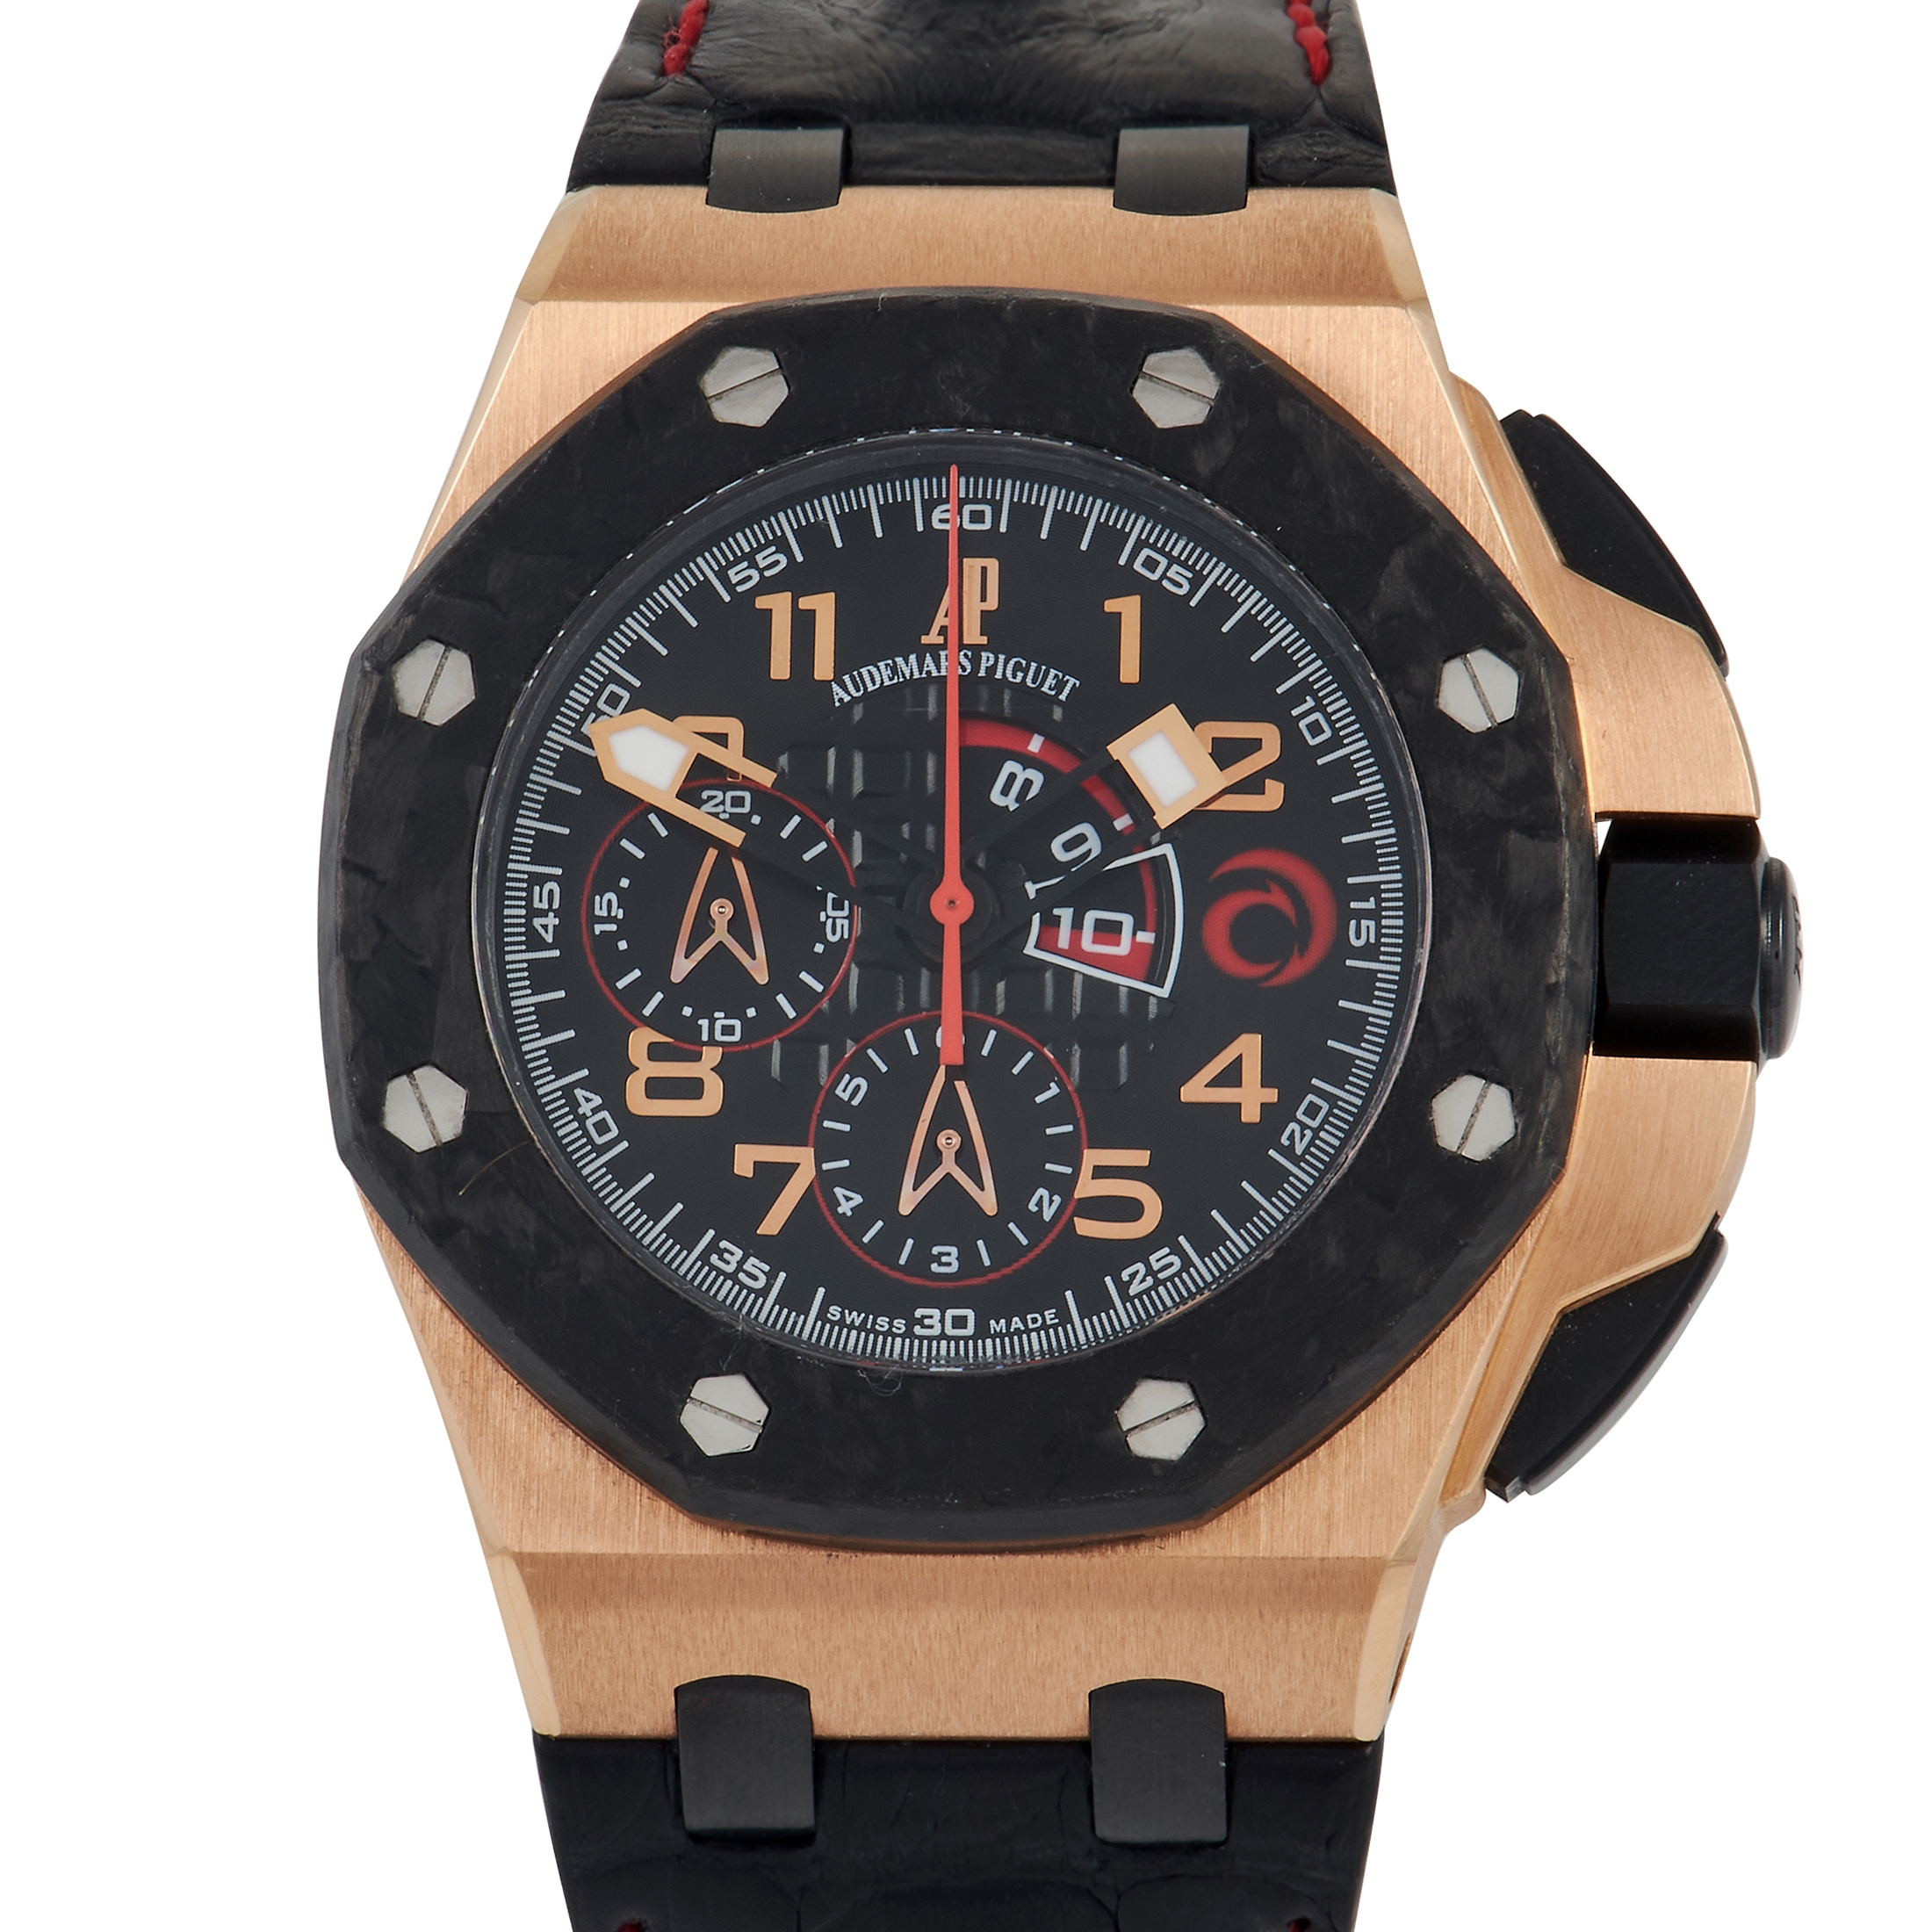 Royal Oak Offshore Chronograph Alinghi Team Limited Edition Watch